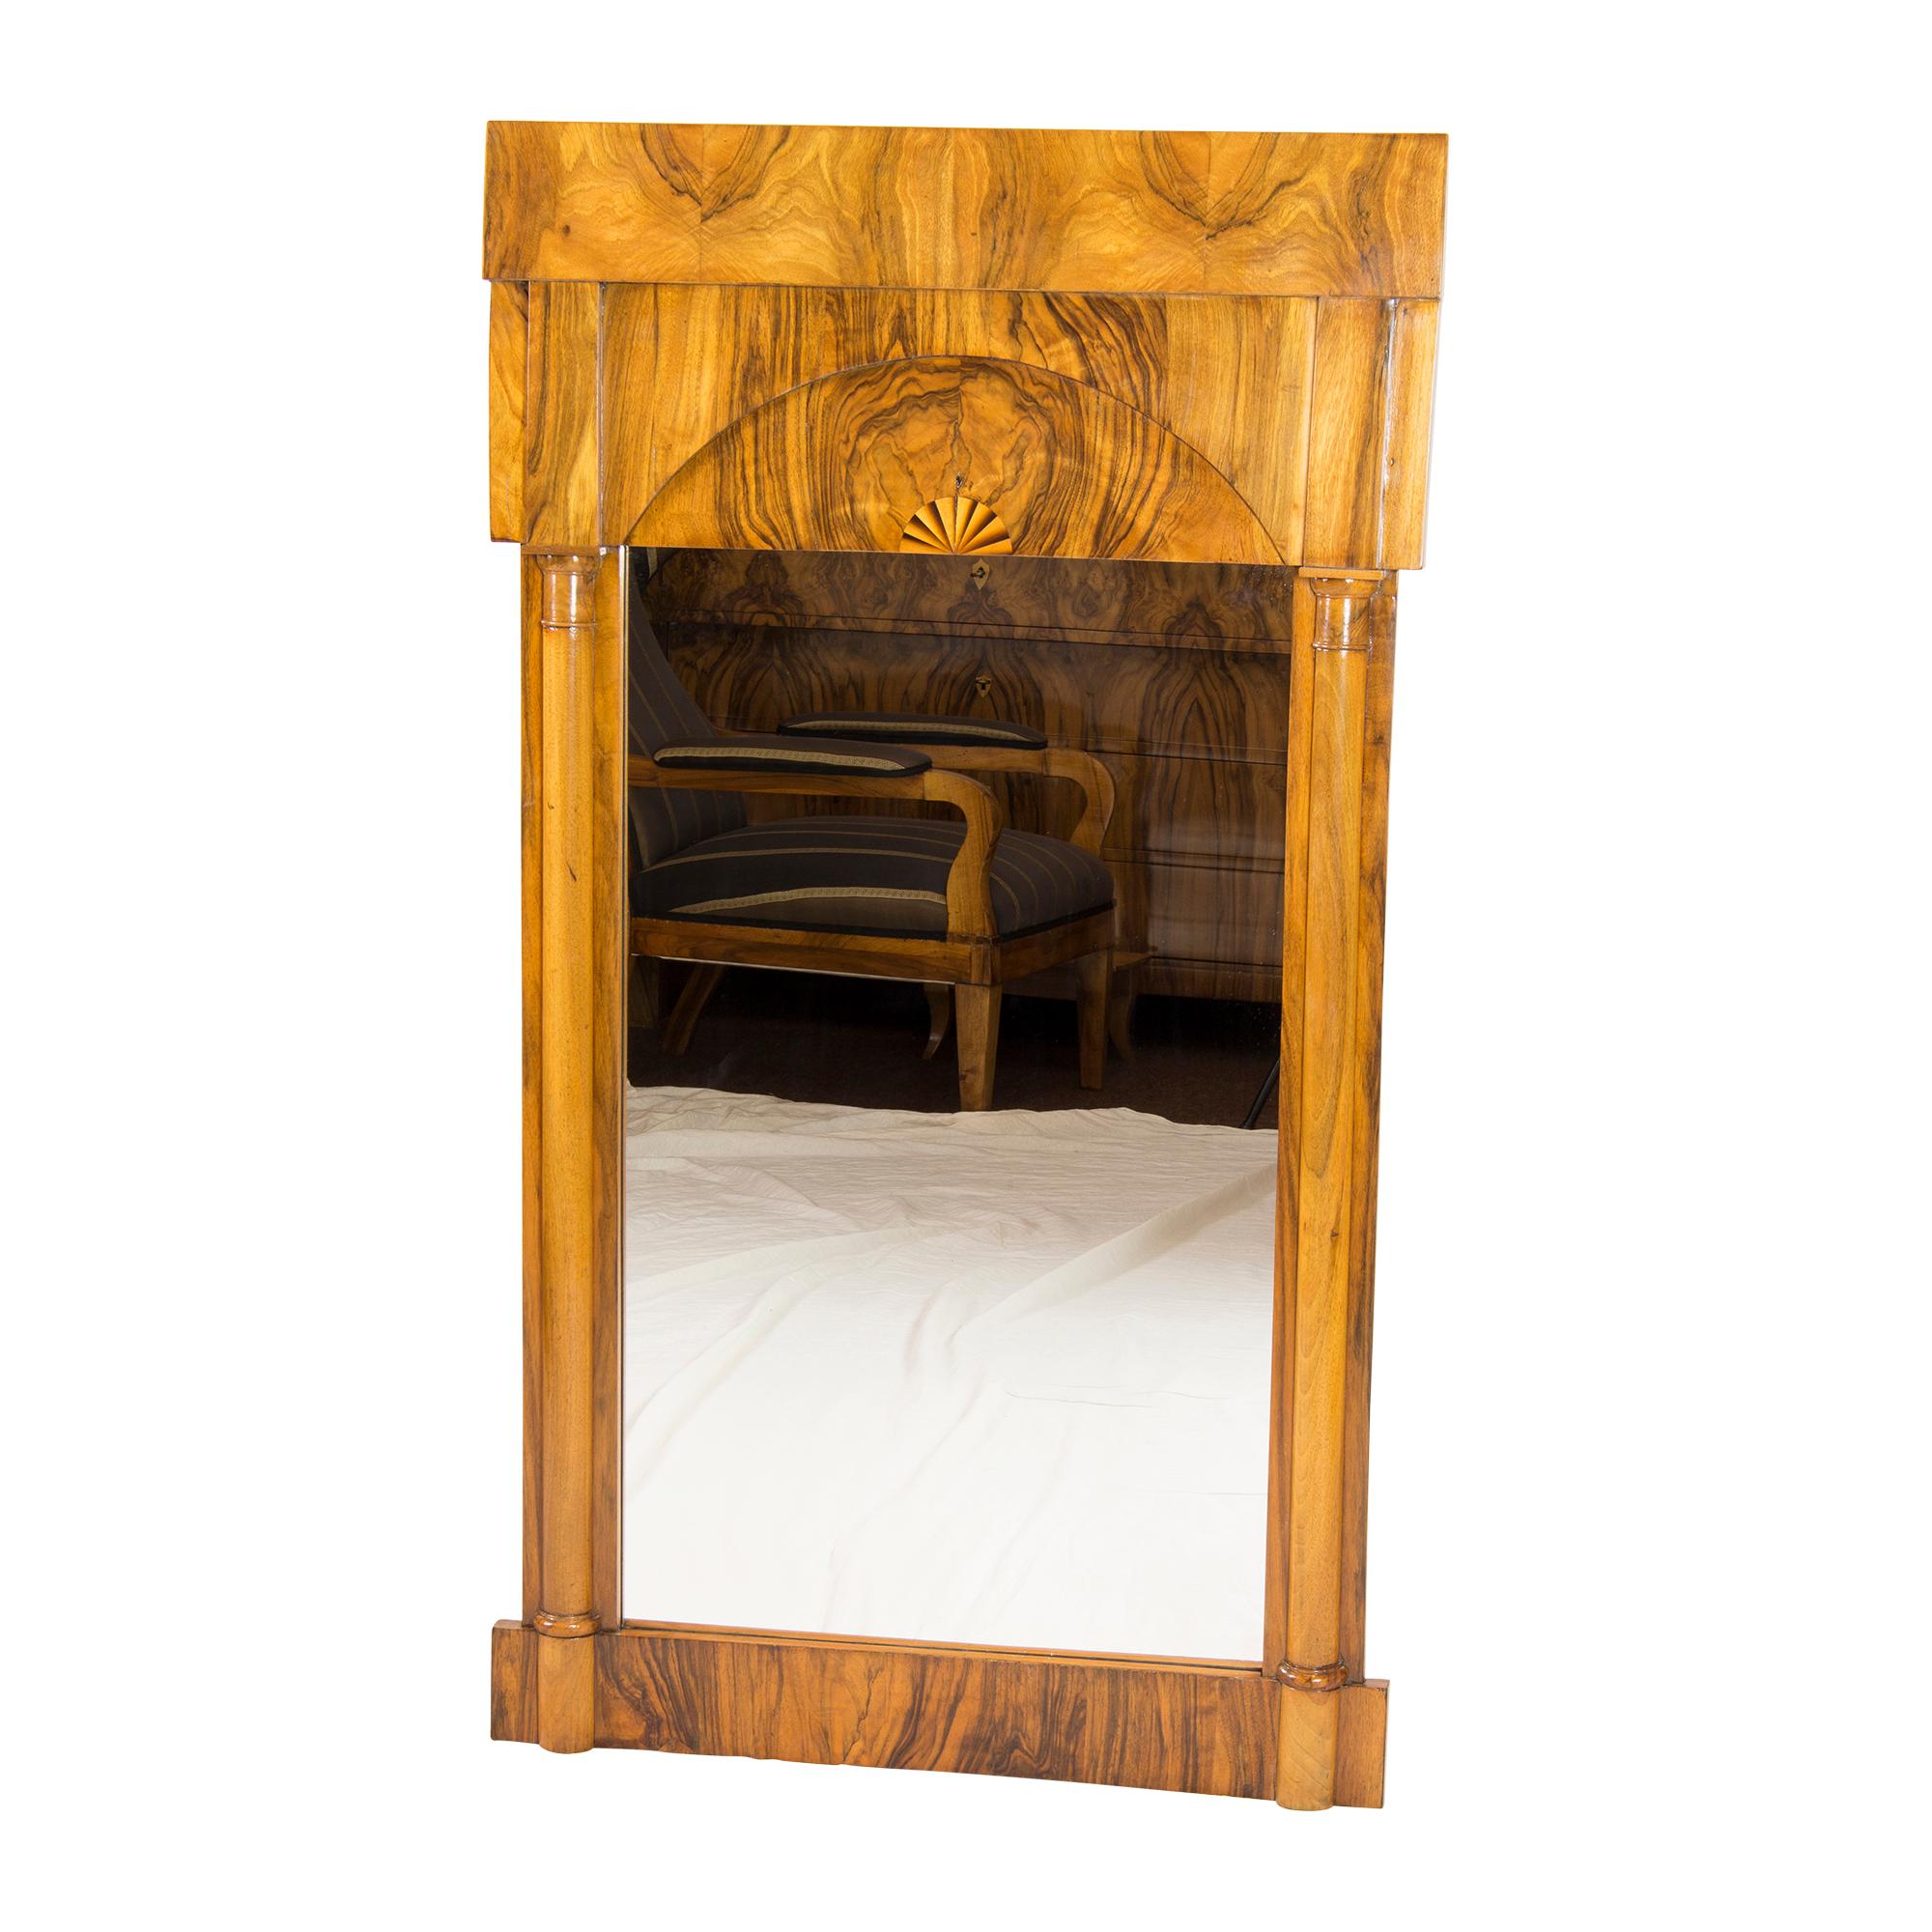 Biedermeier column mirror dates from around 1820 and was made of walnut. The upper part is curved to the back and has a beautiful inlay work in the wood. The mirror glass was renewed. 
Very good hand polished restored condition.